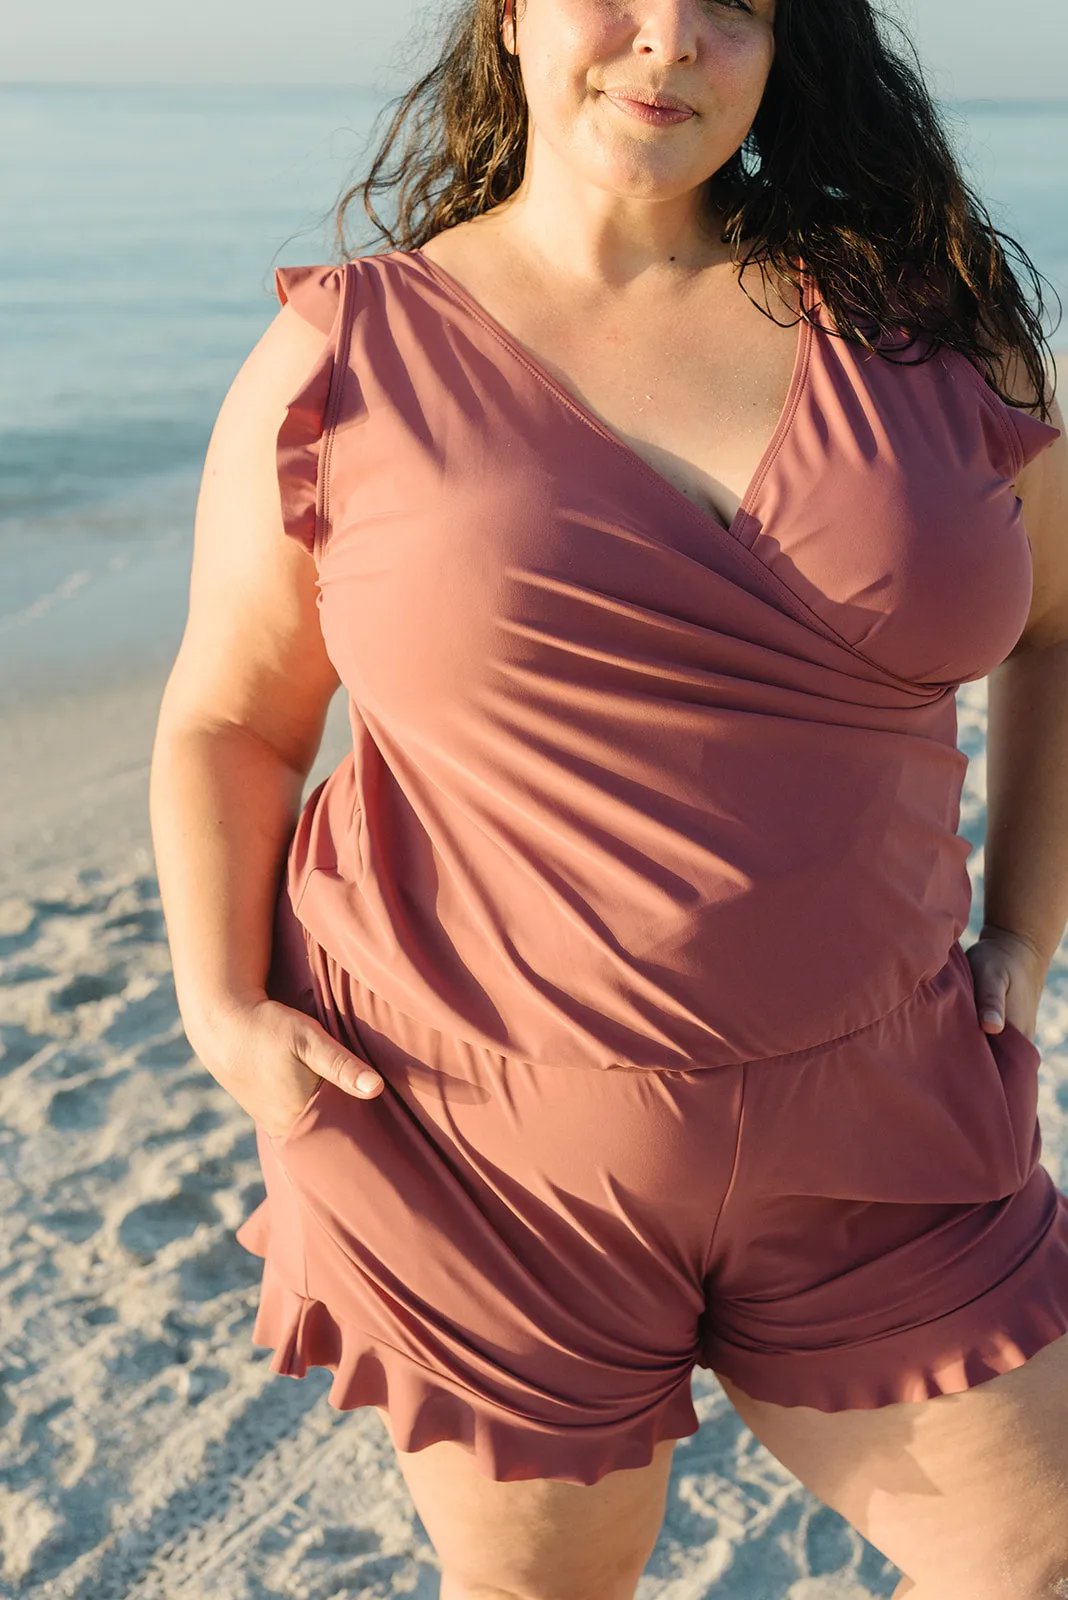 BeachBloom™ - Stylish Swimsuit with Built-in Bra